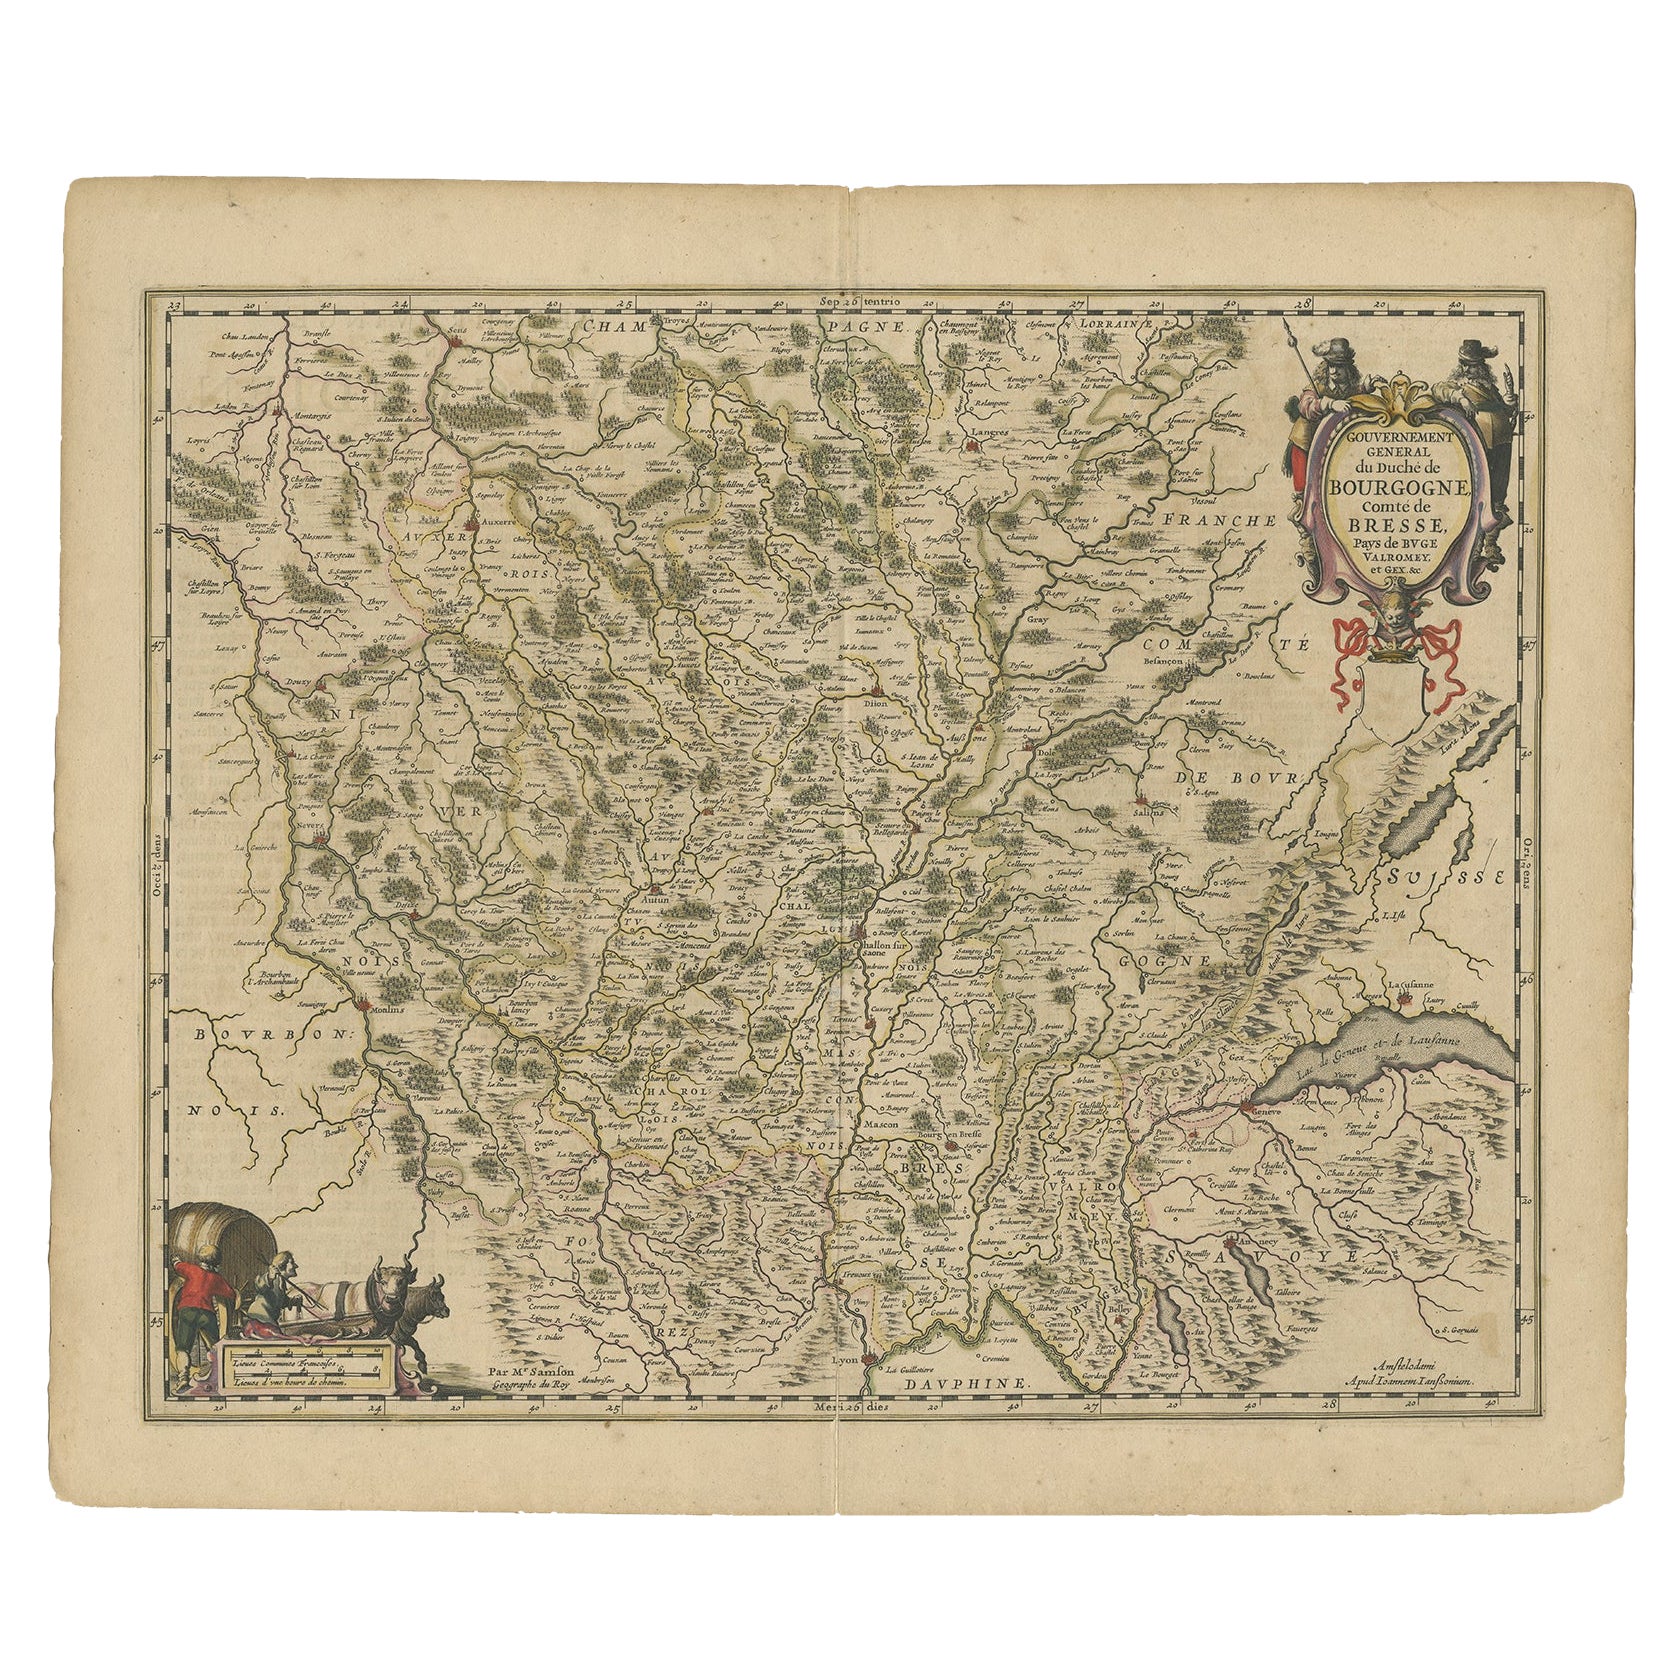 Decorative Antique Map of the Famous French Wine Region of Burgundy, ca.1660